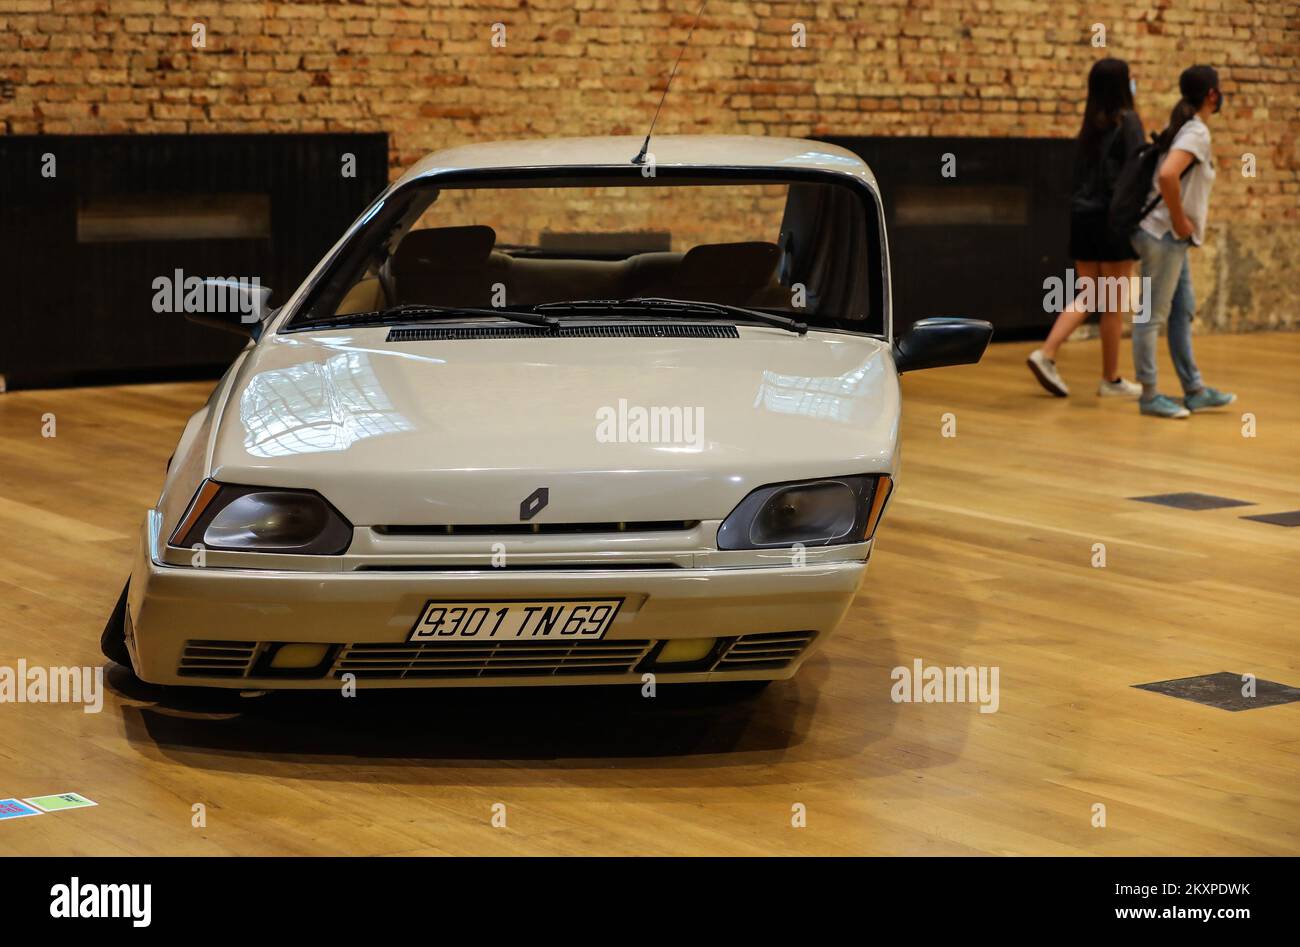 Twisted Renault car is pictured at art exhibition of Erwin Wurm,  contemporary Austrian artist, that is opened in Lauba in Zagreb, Croatia on  03. July, 2021. Photo: Jurica Galoic/PIXSELL Stock Photo - Alamy